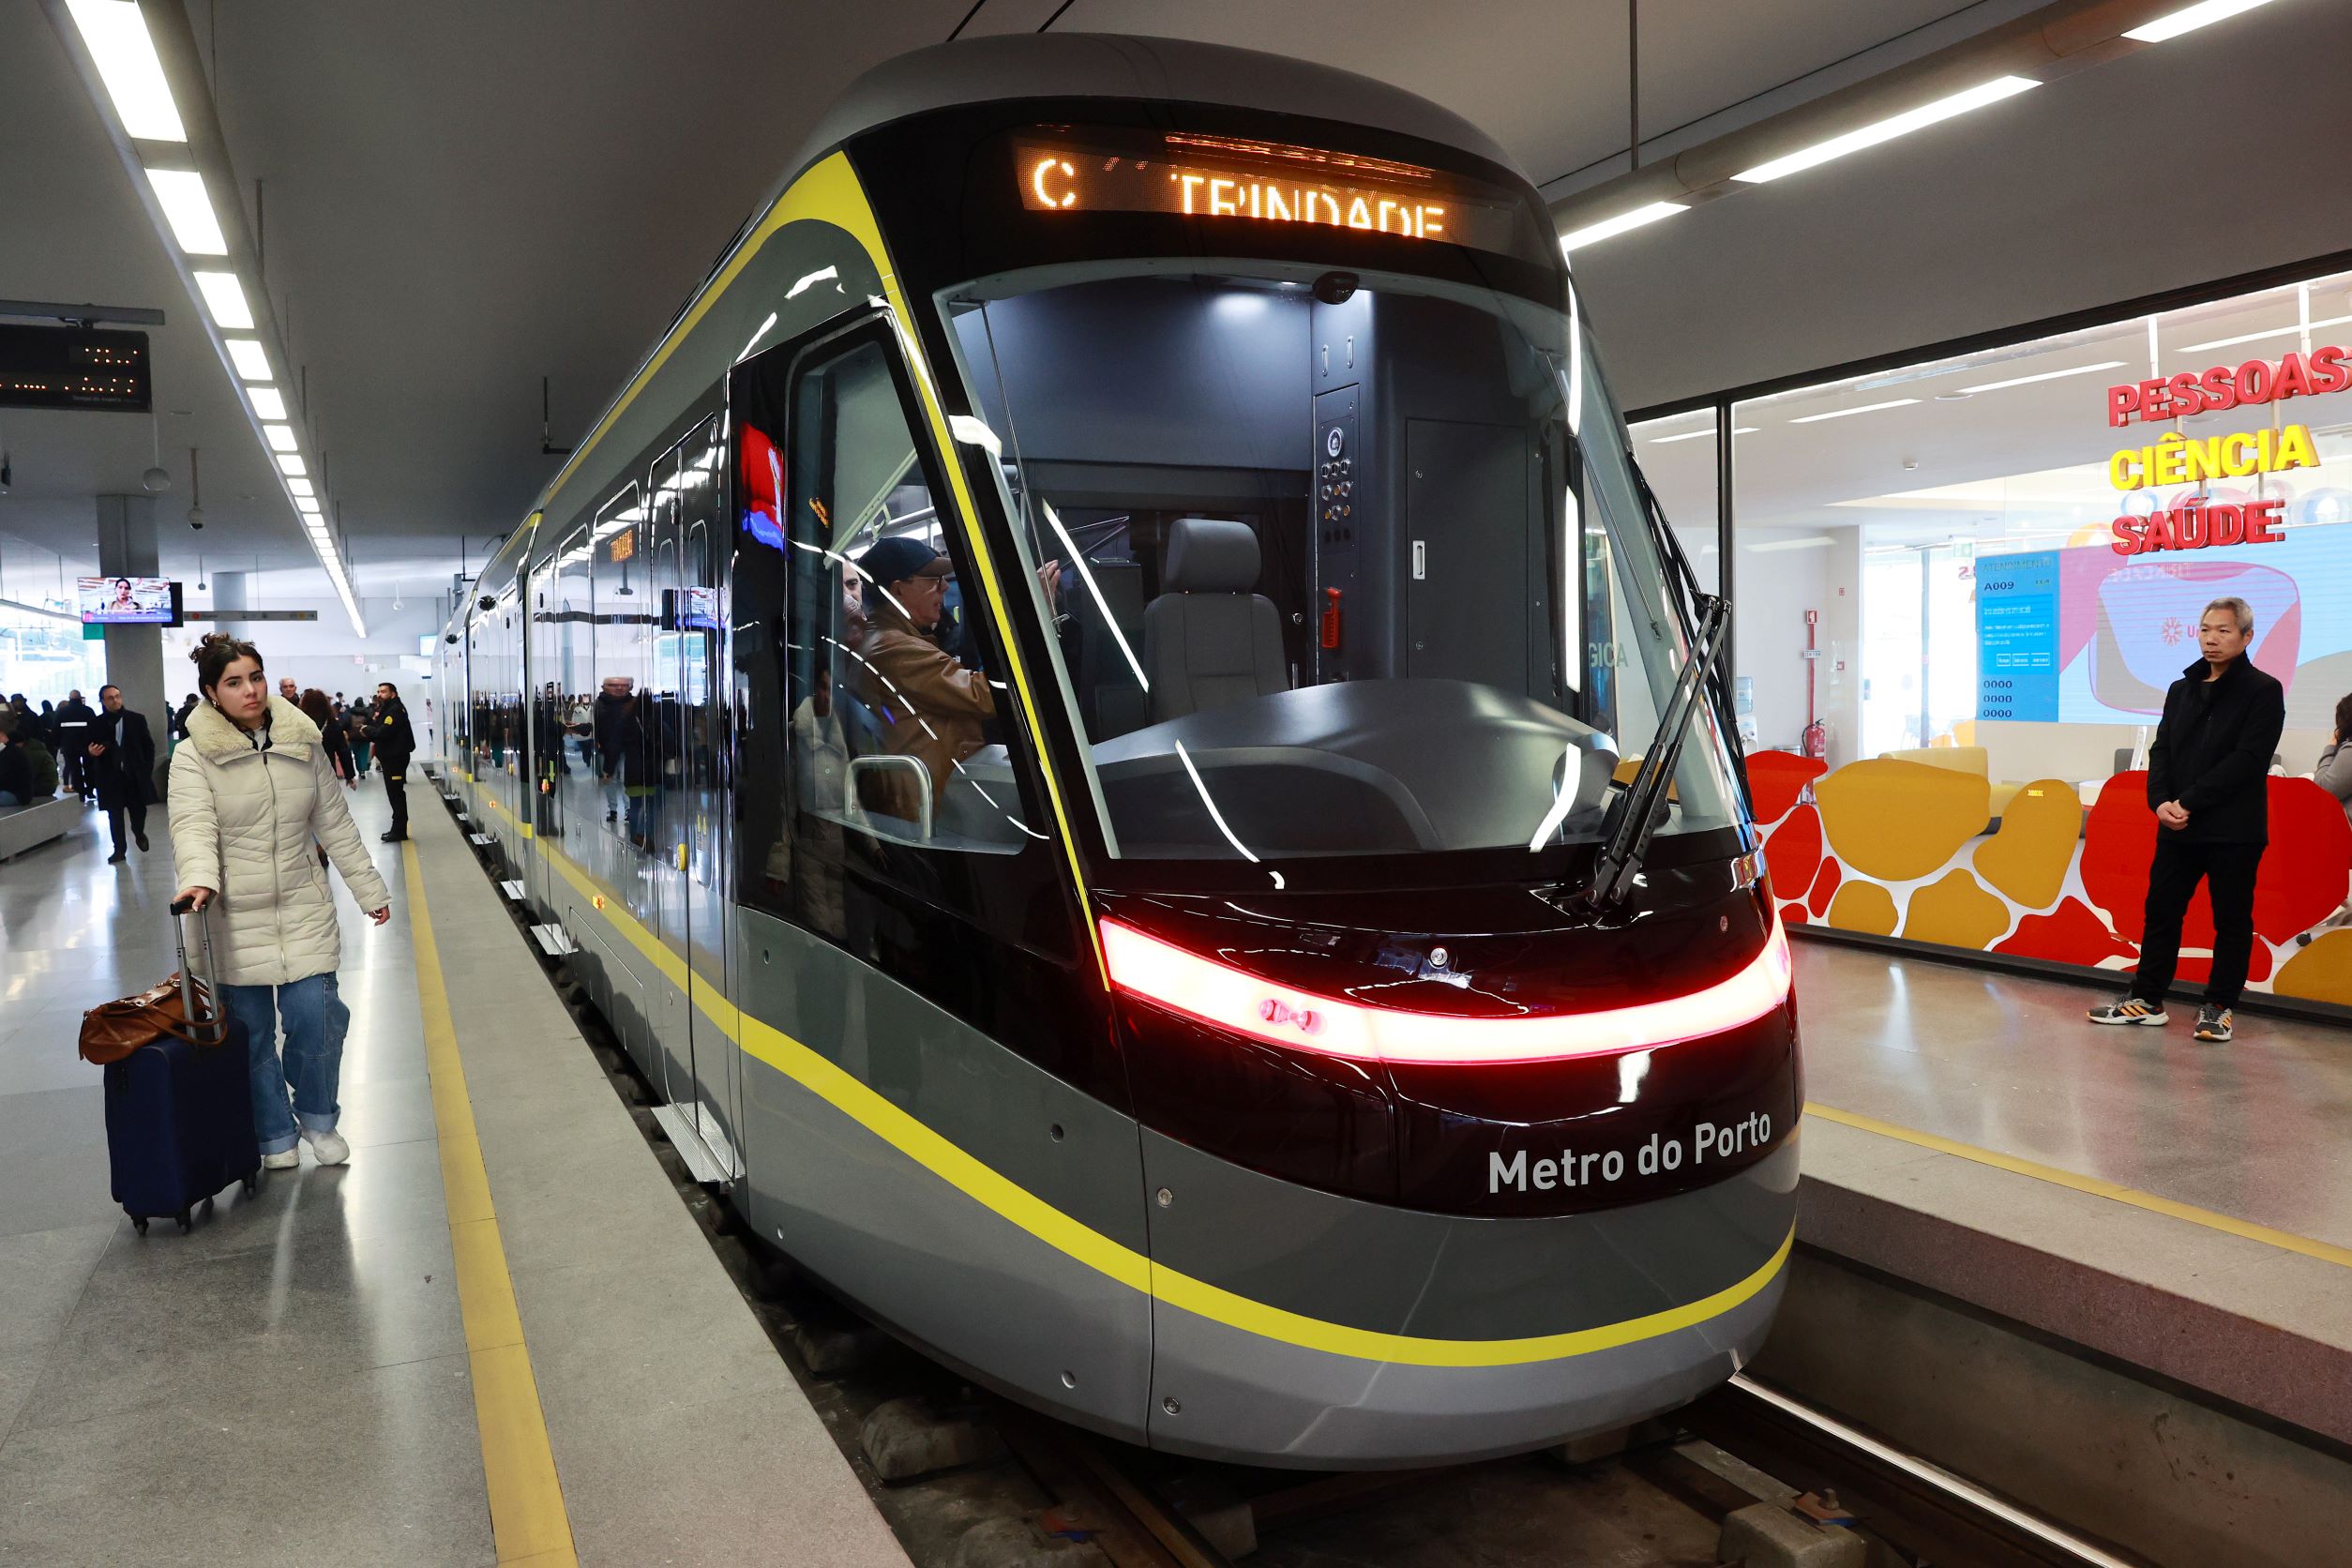 Portugal has inaugurated its first made-in-China metro